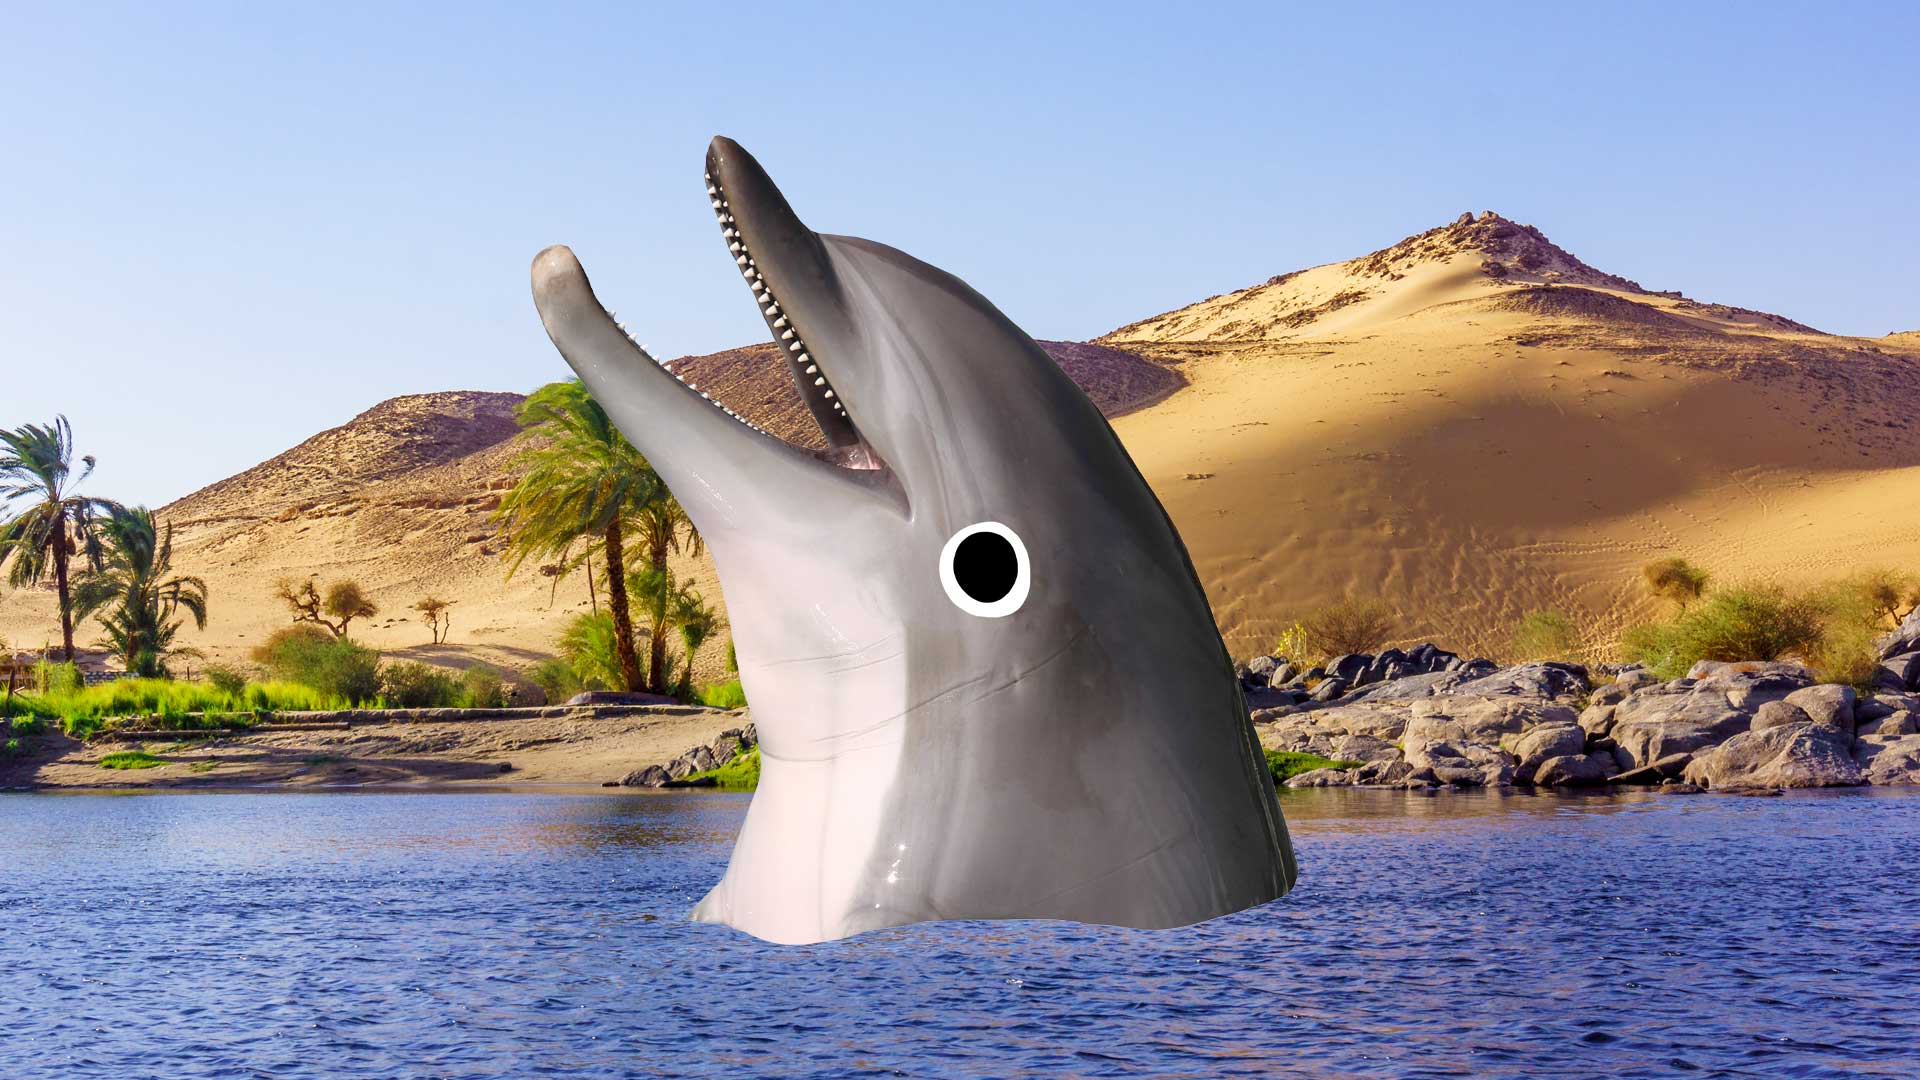 A dolphin in the Nile river